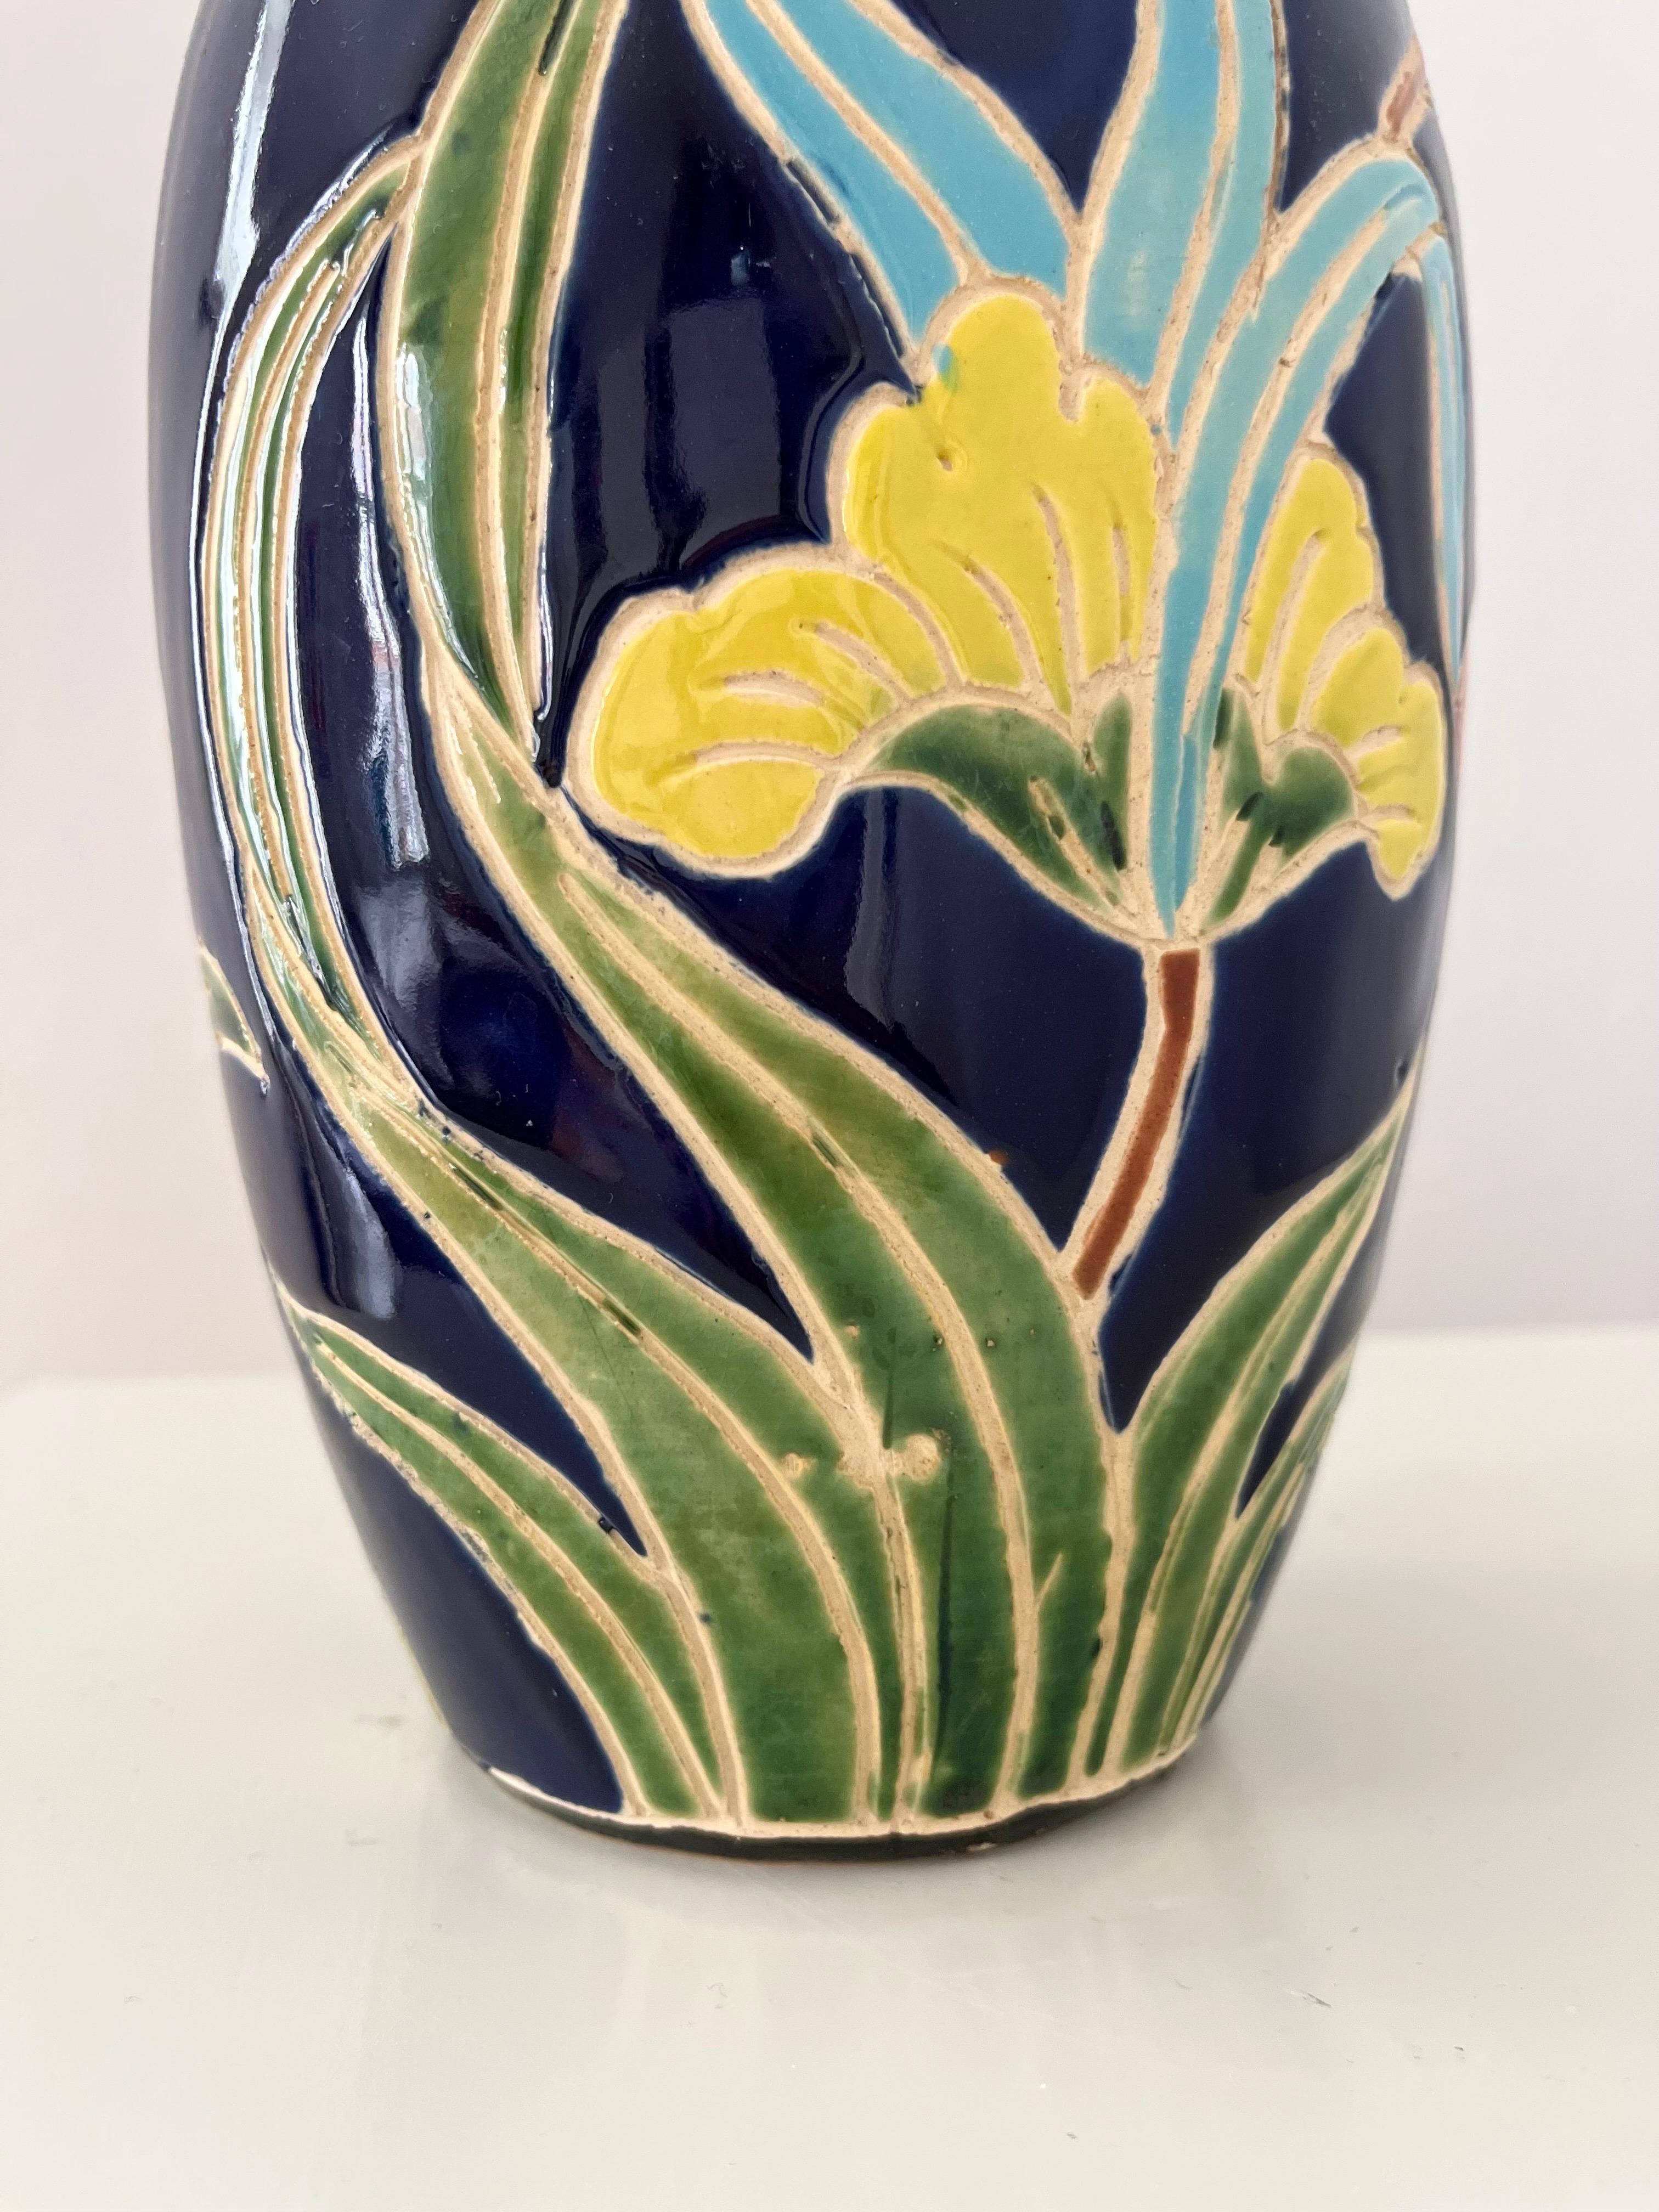 1960s/1970s Scandinavian Organic Modern Ceramic Vase with Colorful Floral Motifs For Sale 6